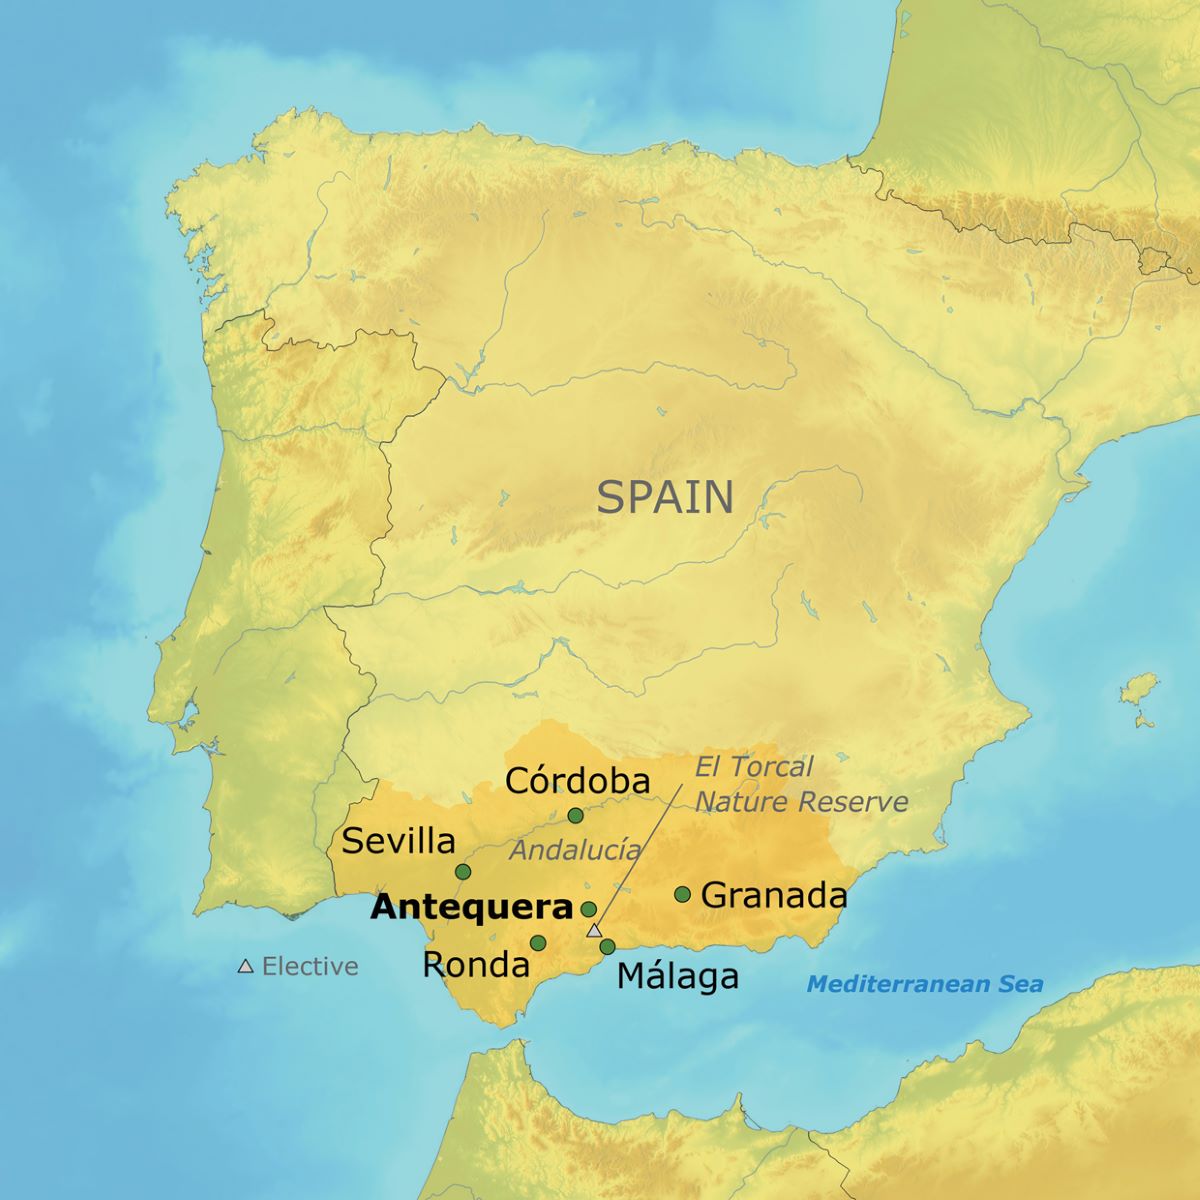 A map of Spain with tour destinations pinned.